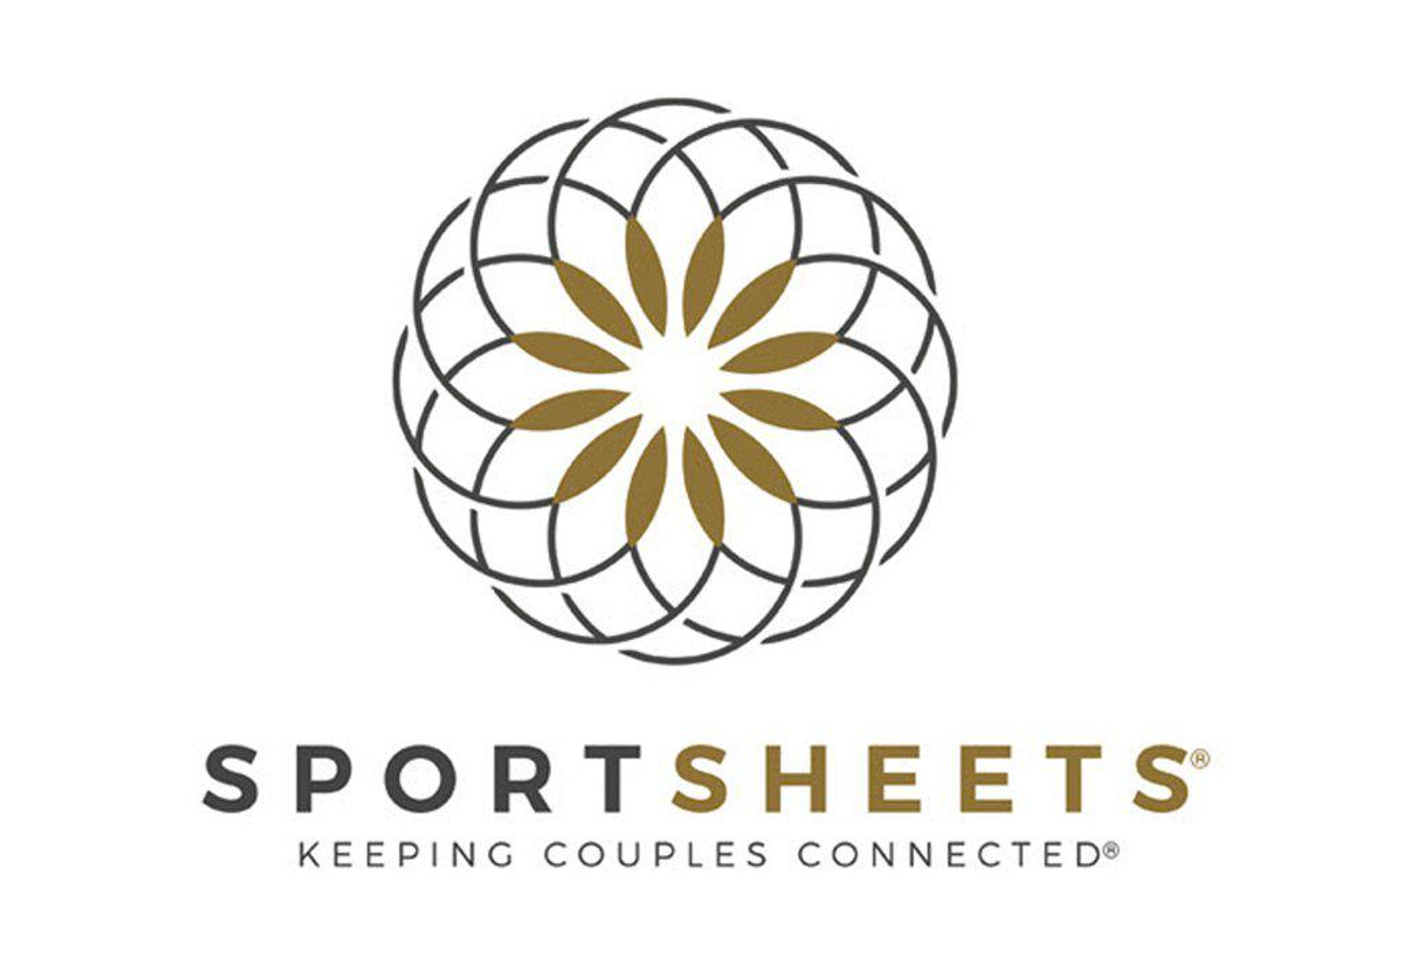 Sportsheets Recognized by OC Business Journal for Growth